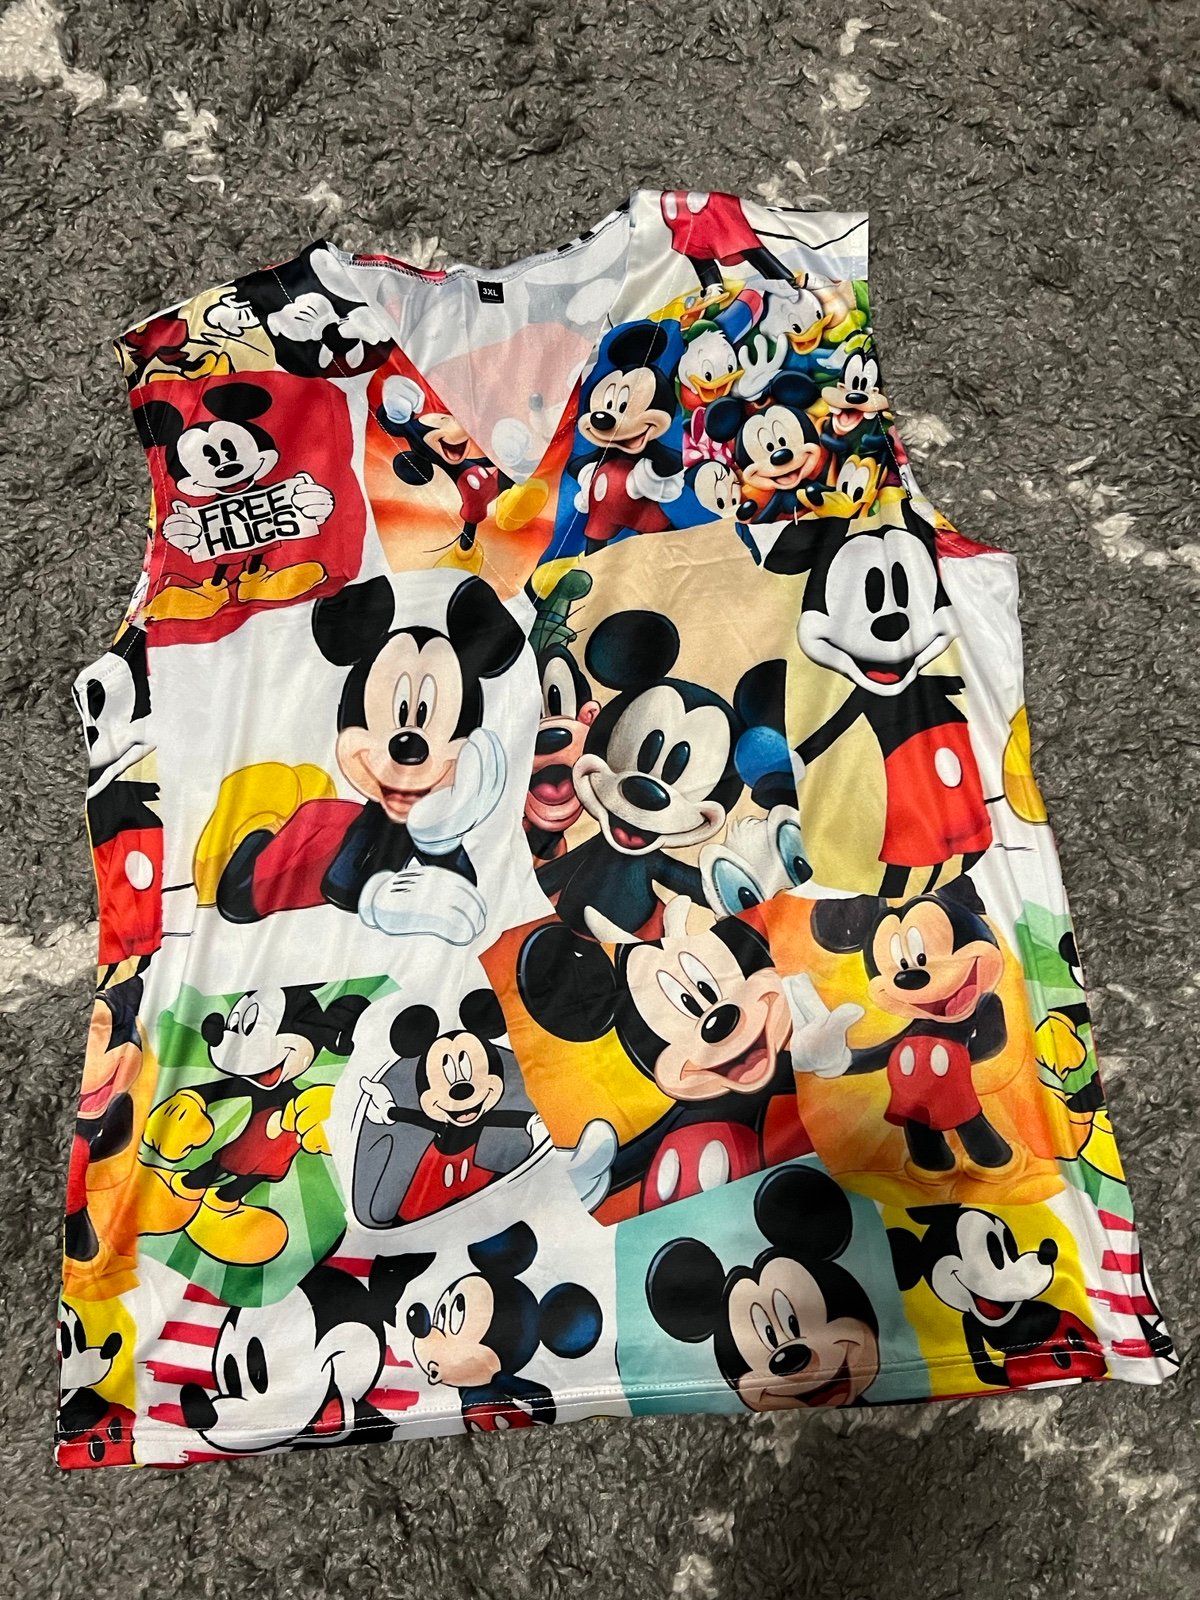 Affordable Mickey 3xl tank top o55RcmTiI just for you